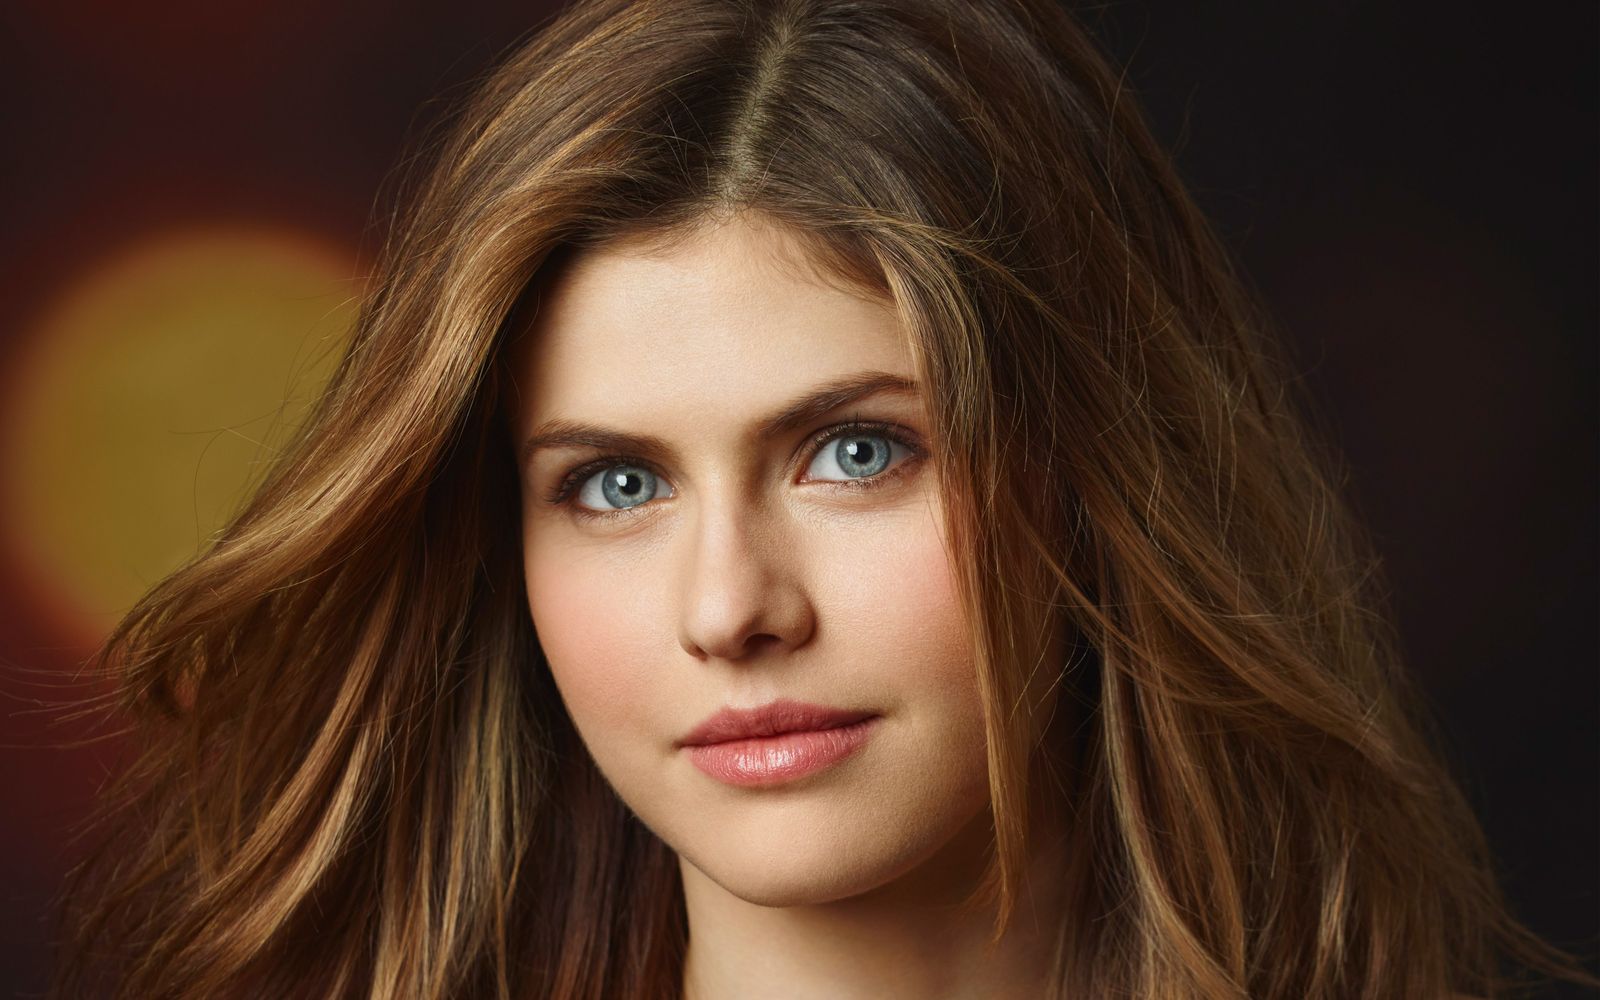 Is Alexandra Daddario Executive Producing And Starring In 'Can You Keep A Secret?